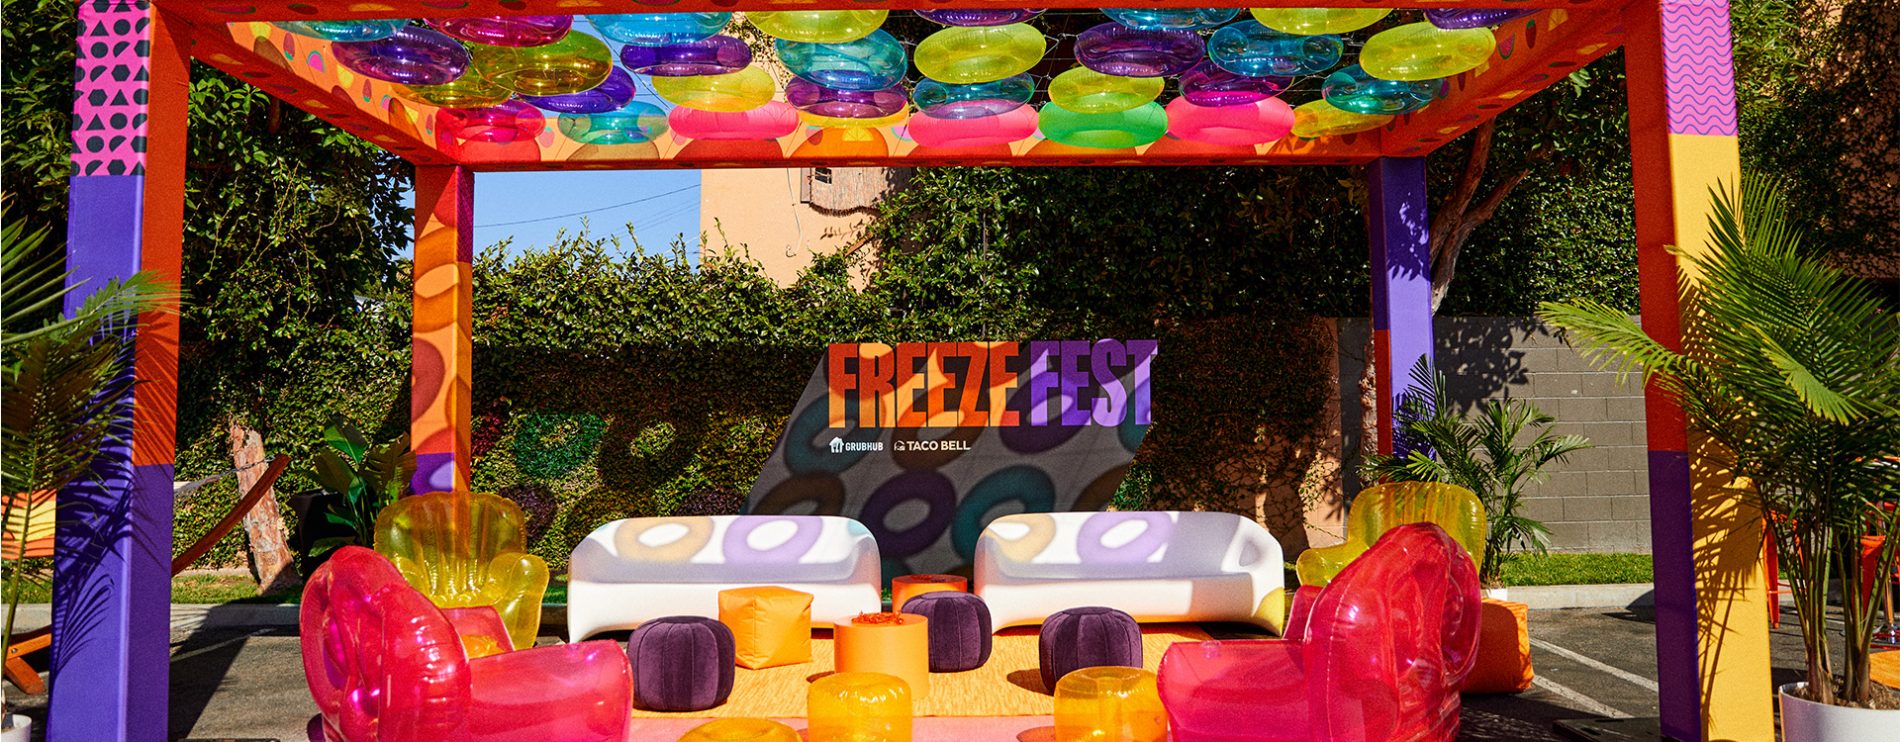 COUCHES AND BLOW UP CHAIRS SIT UNDER INNER TUBE OVERHANG AT TACO BELL X GRUBHUB FREEZE FEST